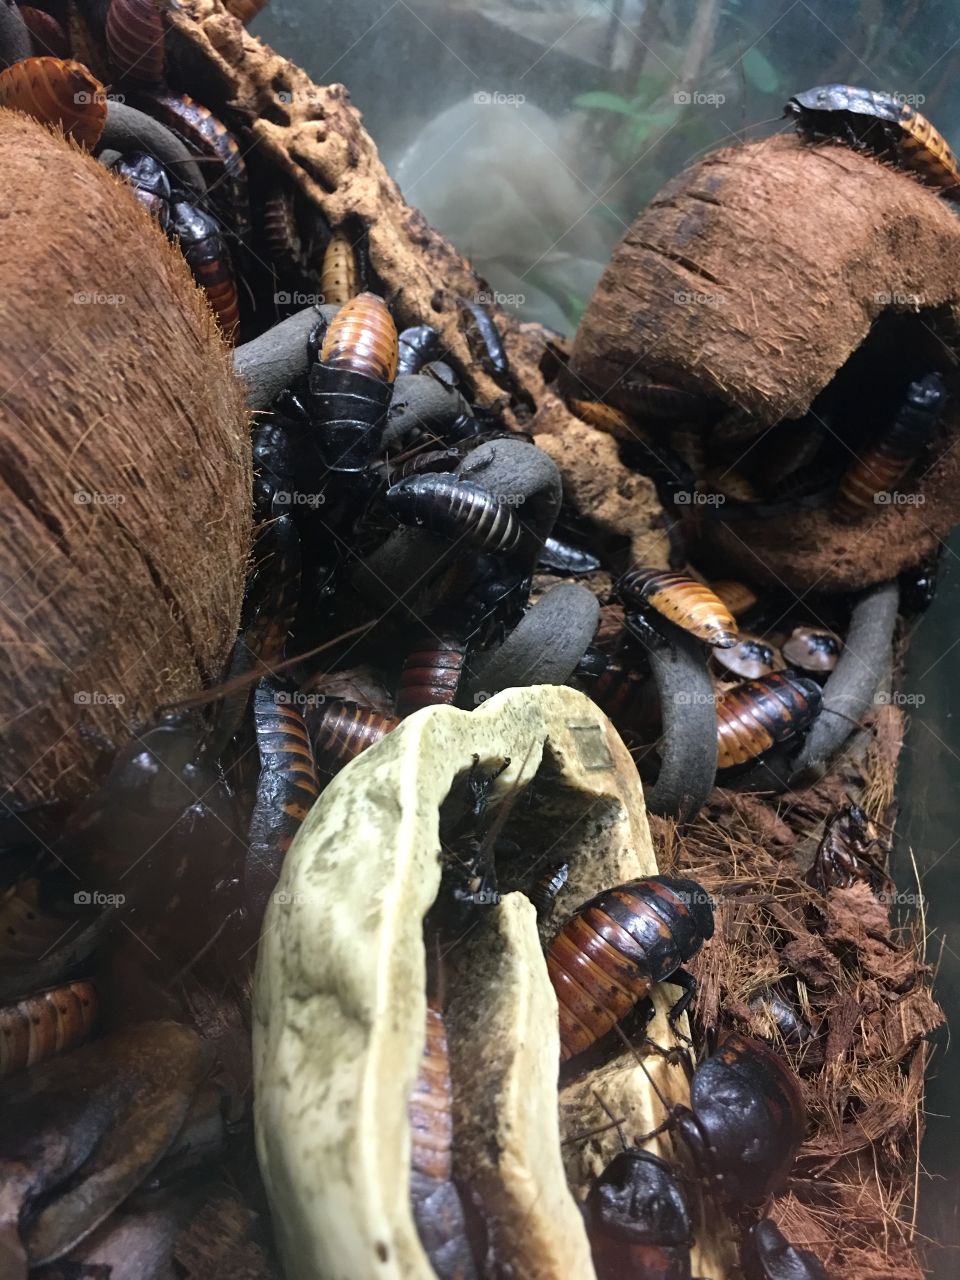 Hissing cockroaches